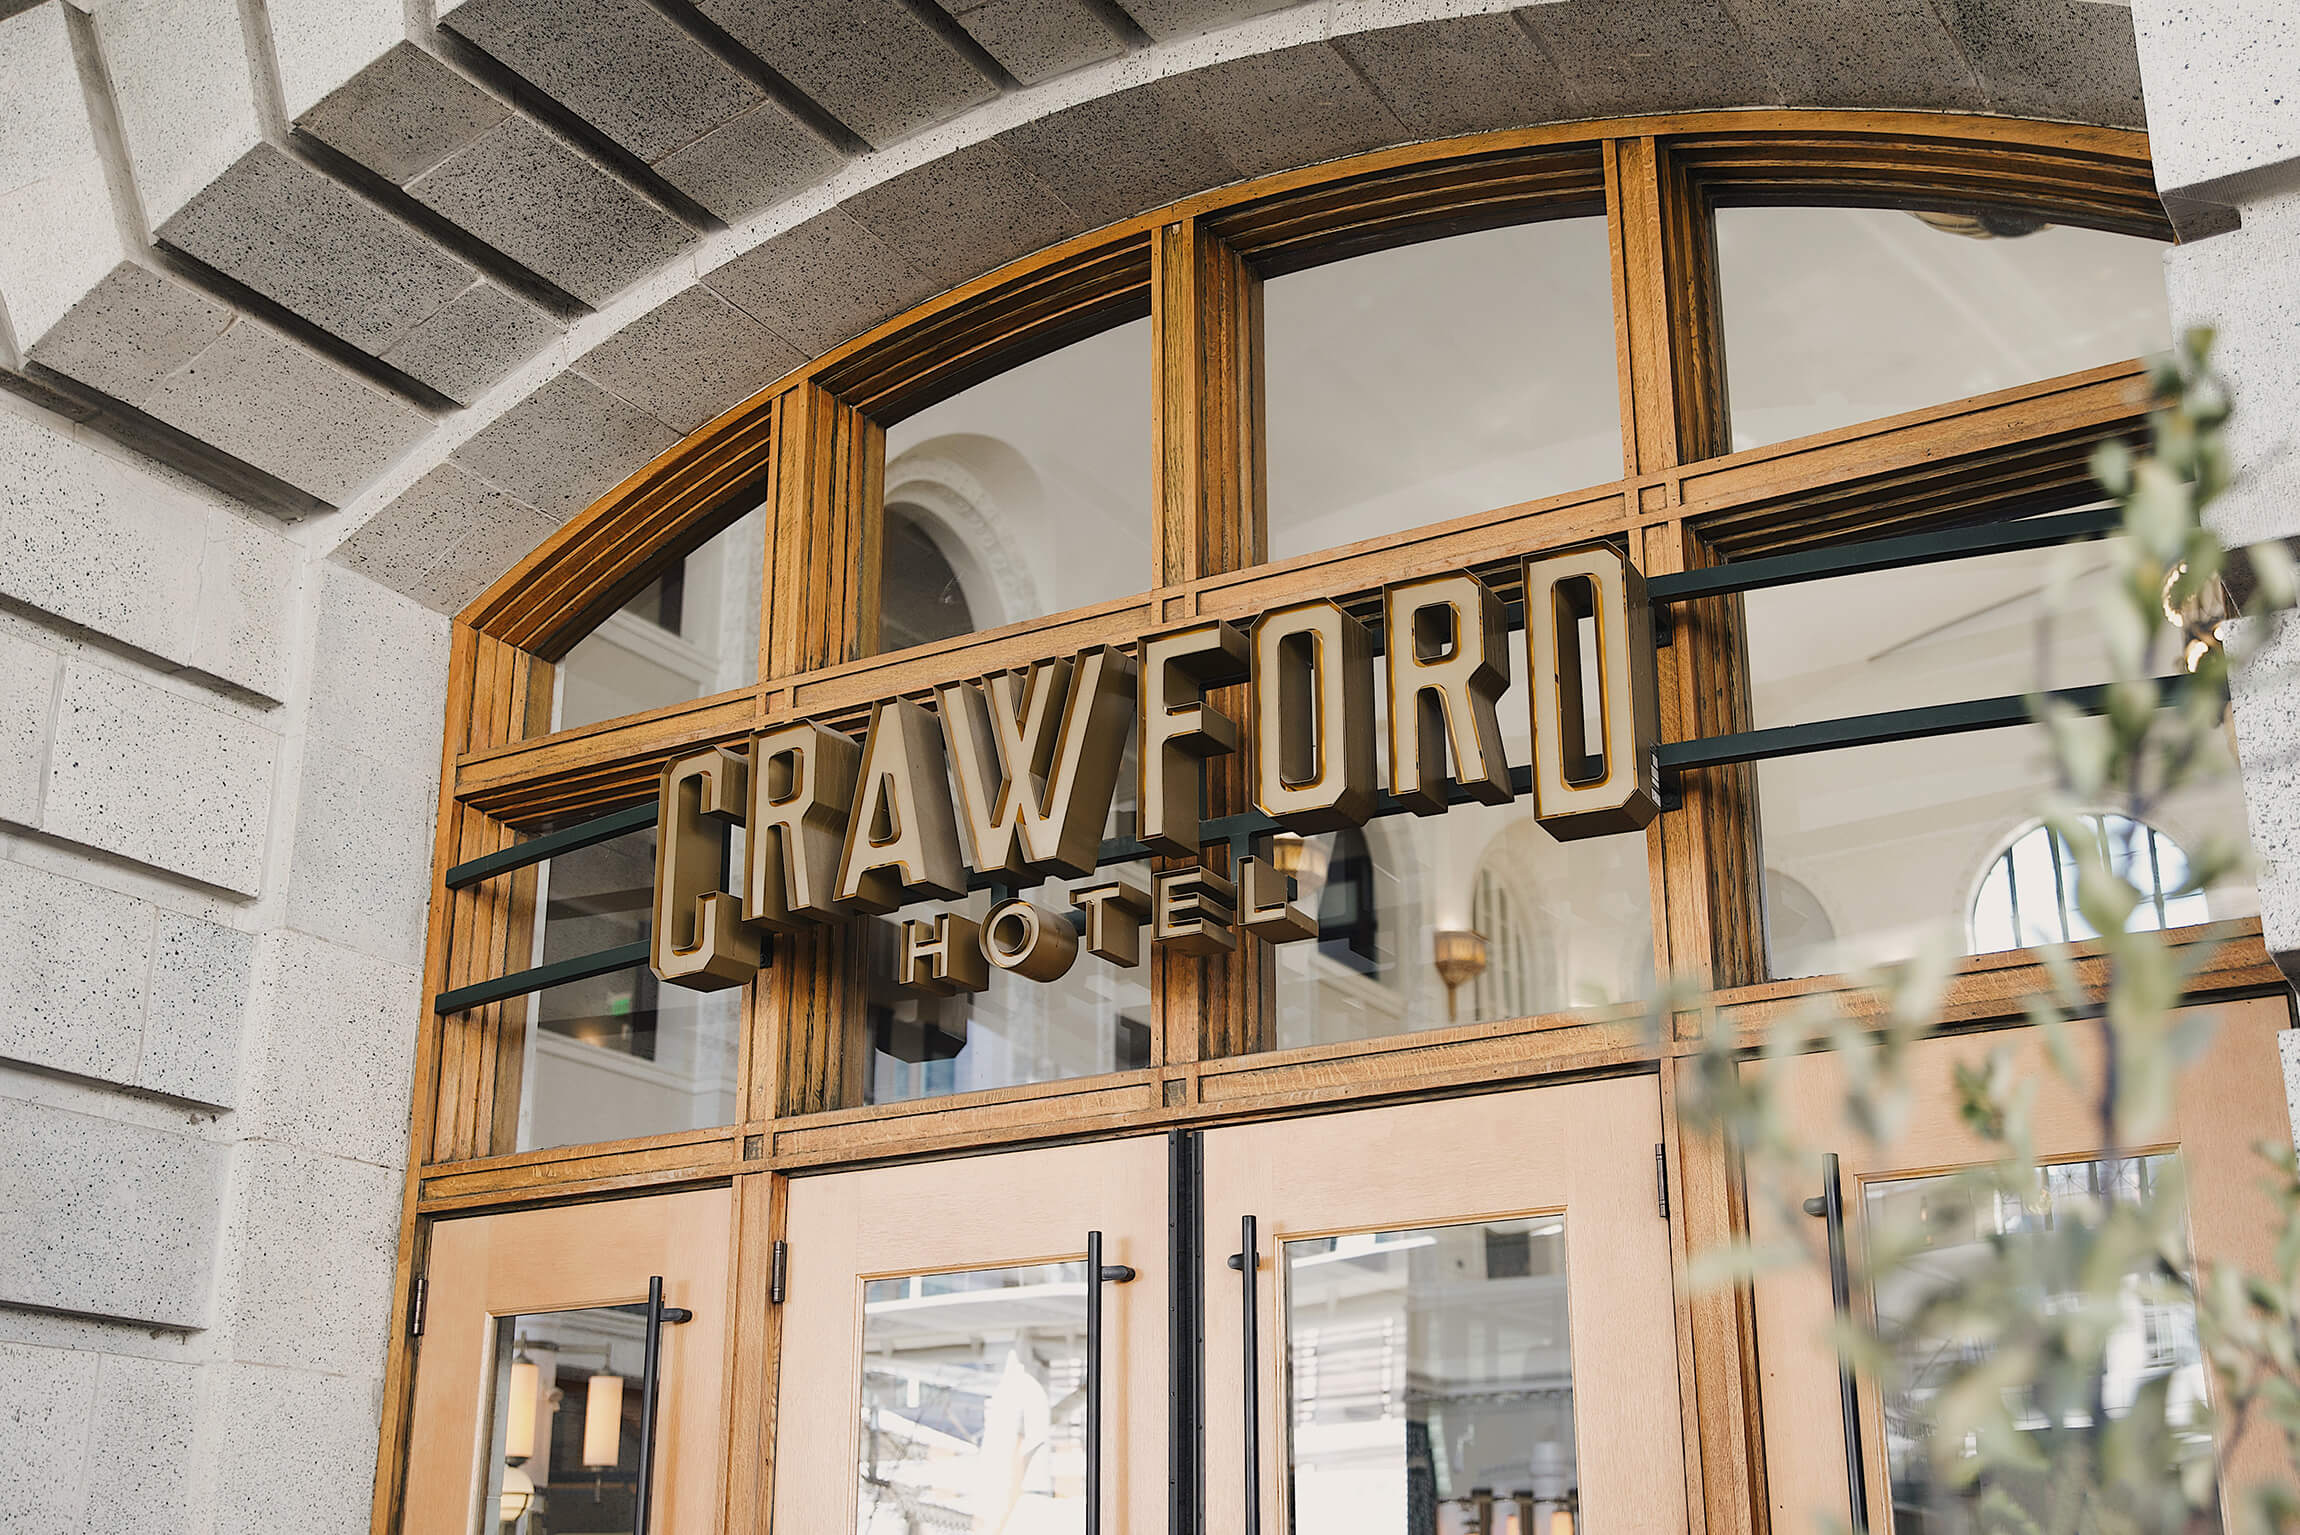 The exterior of the Crawford Hotel in Denver, Colorado.